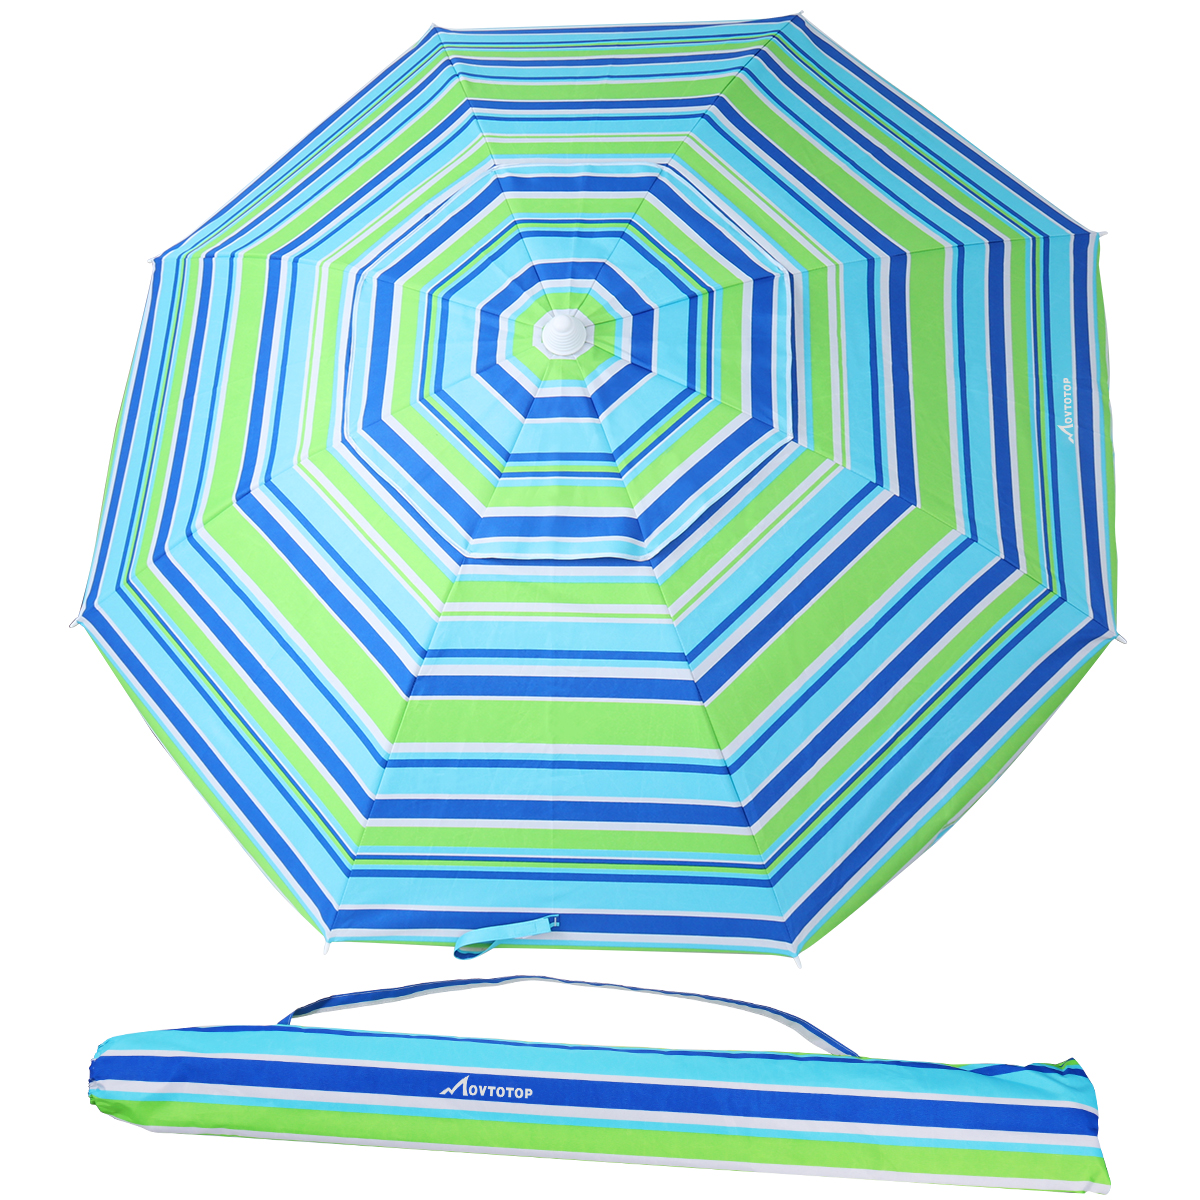 MOVTOTOP 6.5 Feet Striped Beach Umbrella UV Protection with Tilt and Telescoping Pole Adjustable Sand Umbrella with Sand Anchor and Carry Bag (Blue and Green) - image 2 of 8